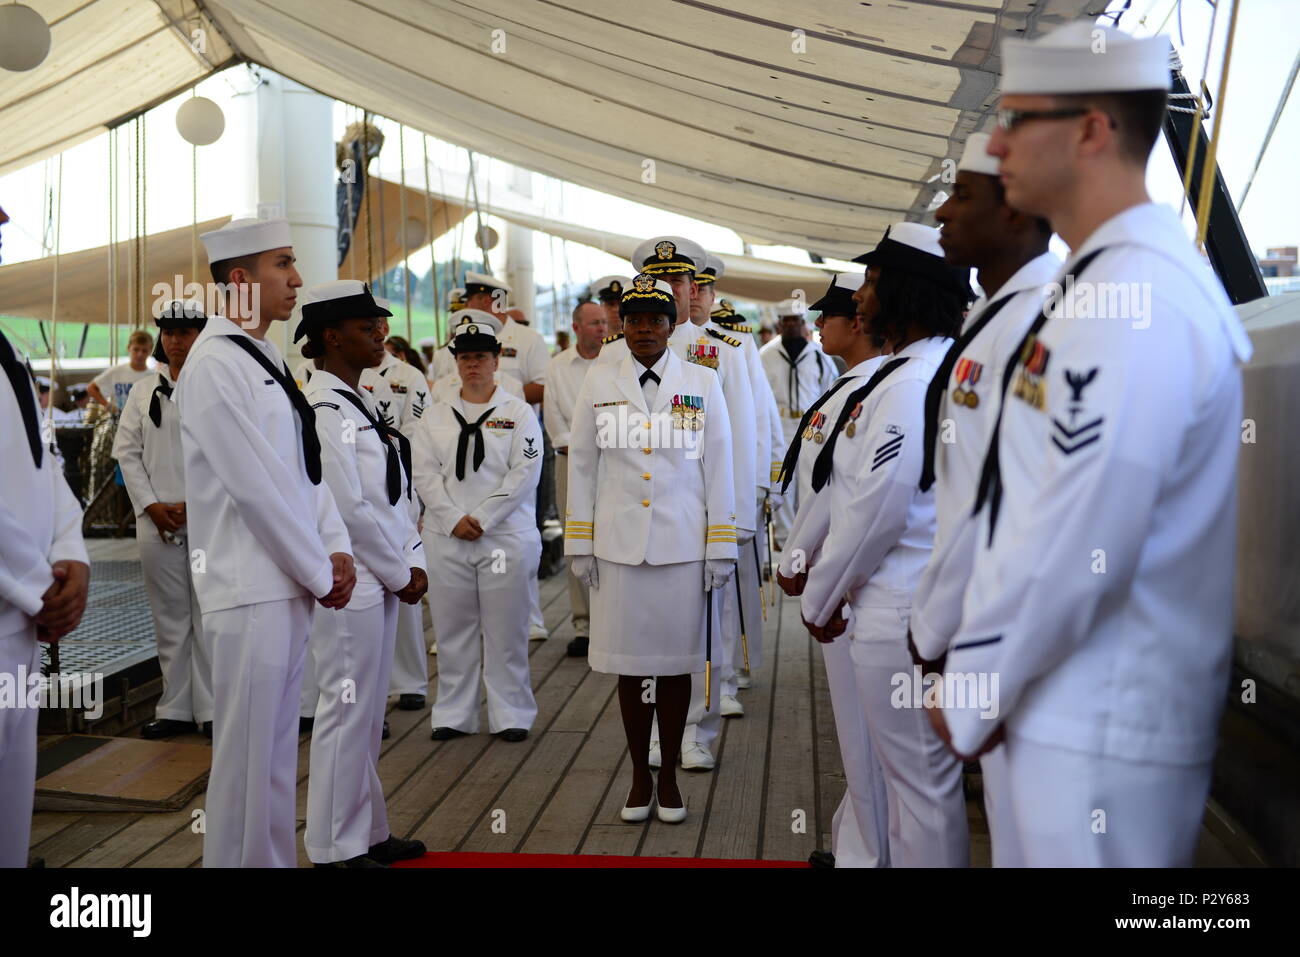 160806-N-DD899-200 BALTIMORE, Md. (Aug. 8, 2016) Cmdr. Tasya Lacy, center, prepares to pass through ceremonial sideboys as part of the official party for the Navy Operational Support Center (NOSC) Batimore change of command ceremony aboard USS Constellation in Baltimore Inner Harbor. Lacy relieved Cmdr. John B. Downes as the NOSC Baltimore commanding officer. (U.S. Navy photo by Mass Communication Specialist 1st Class Sharay Bennett/Released) Stock Photo